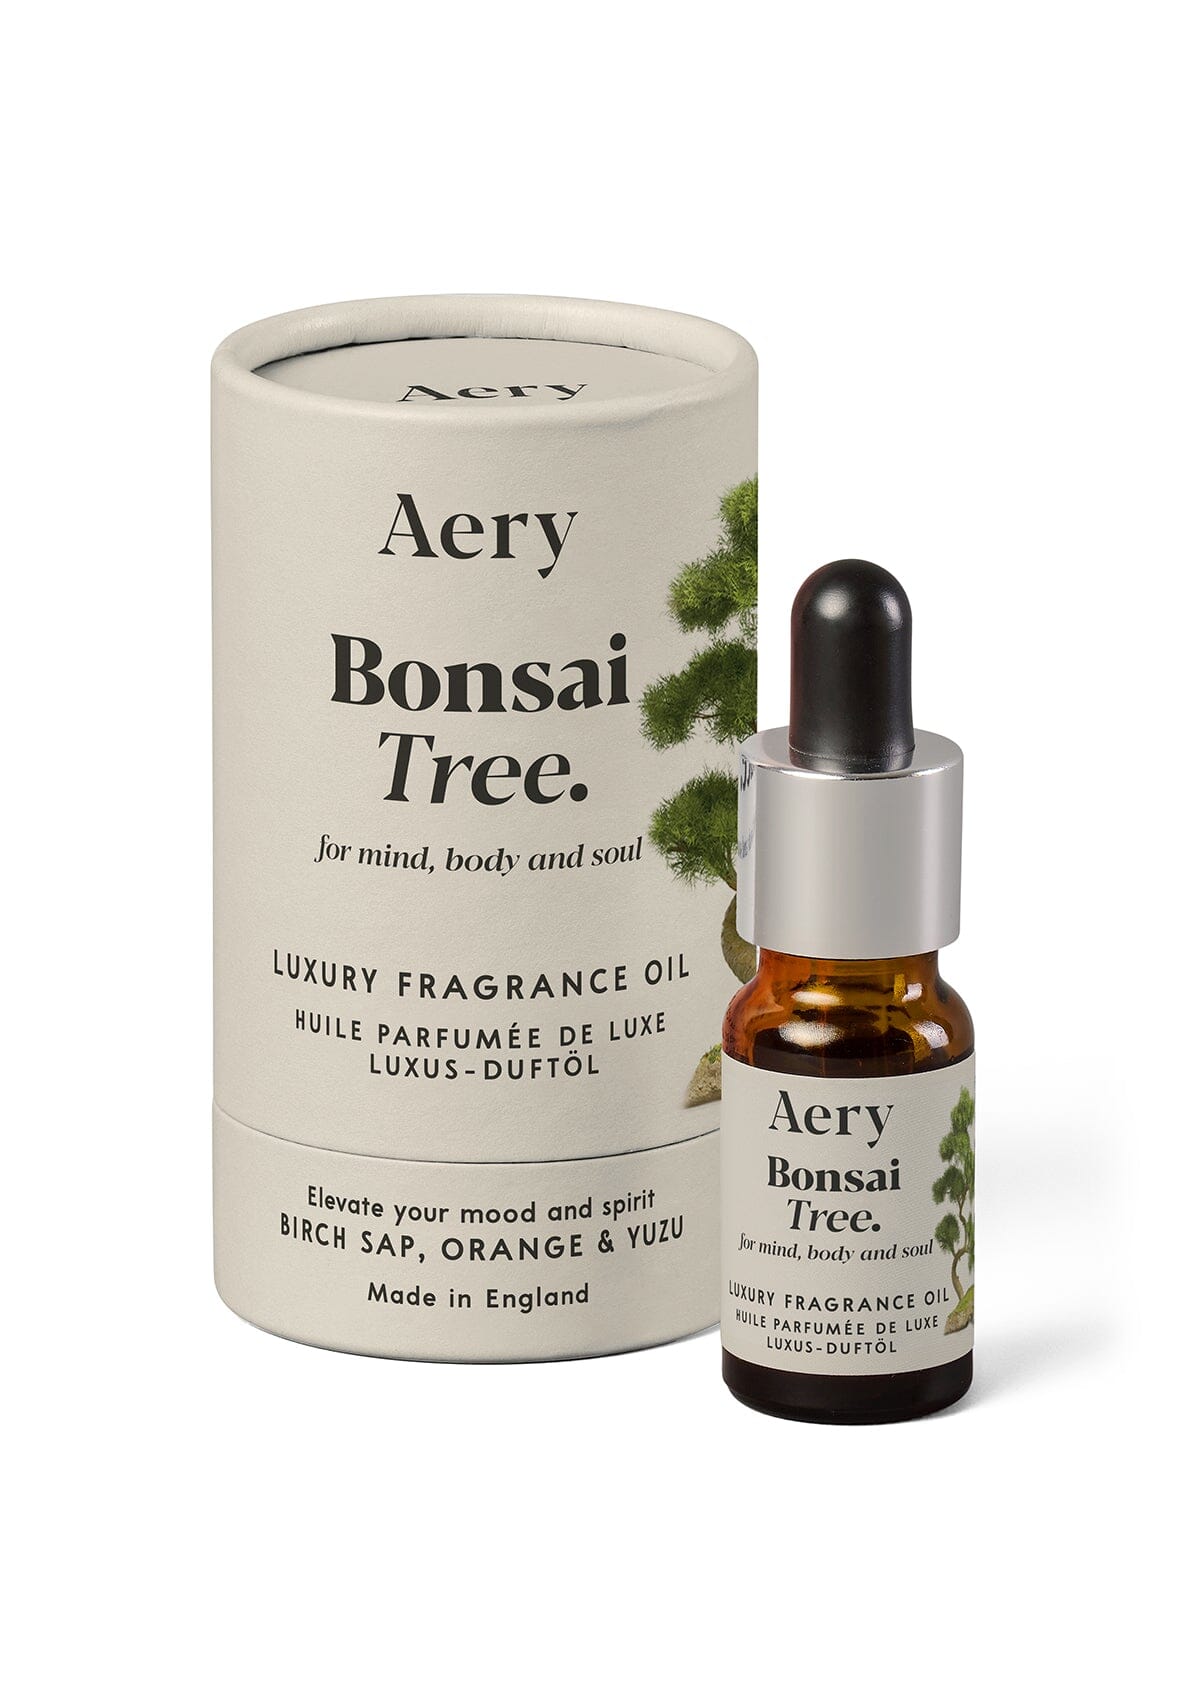 Cream Bonsai Tree fragrance oil displayed next to product packaging by Aery on white background 